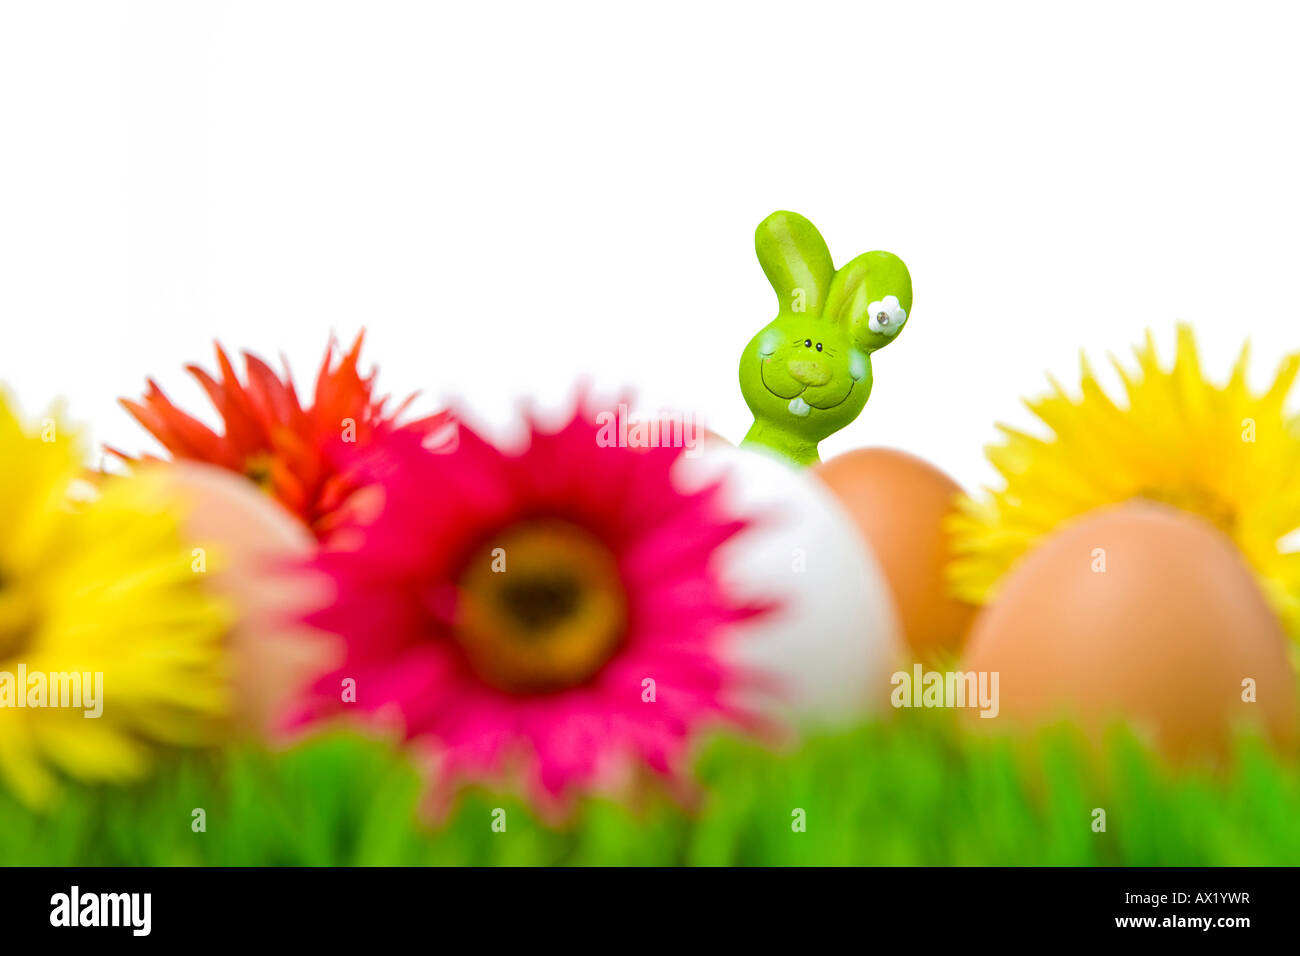 Easter bunny hiding behind eggs on a flower meadow Stock Photo